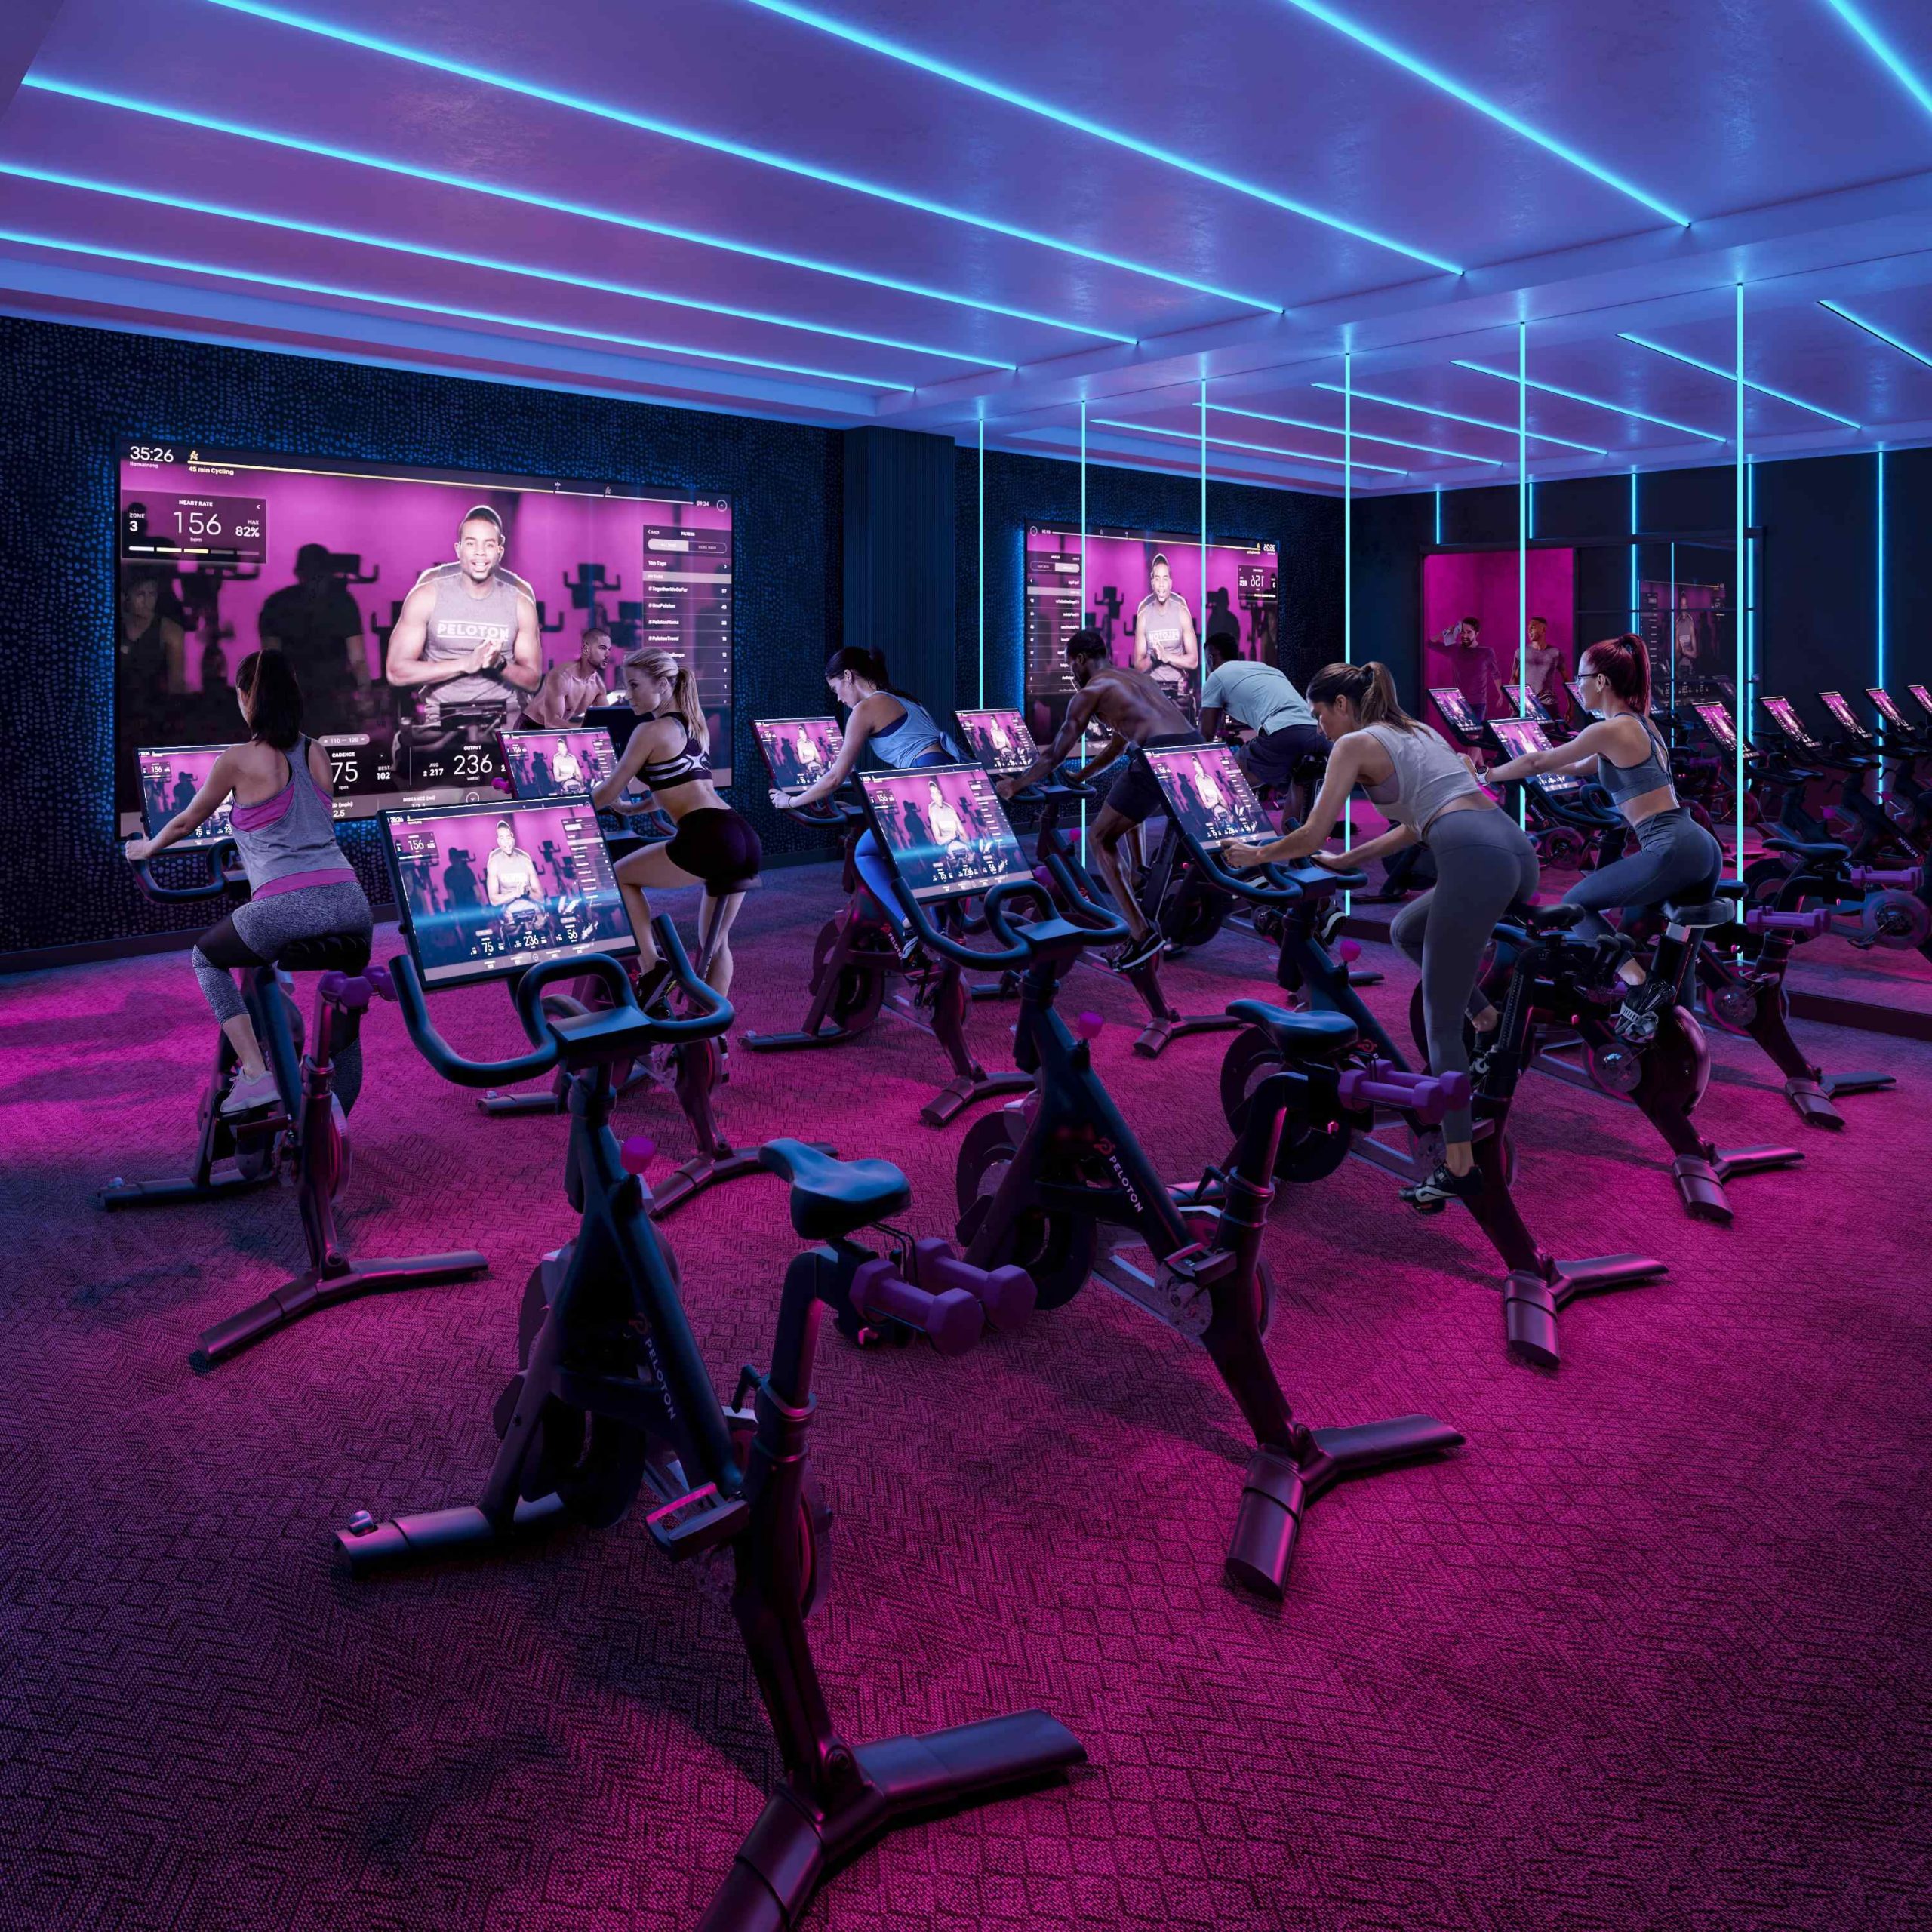 Spin studio at Rambler, a student housing apartment complex in Austin, TX.